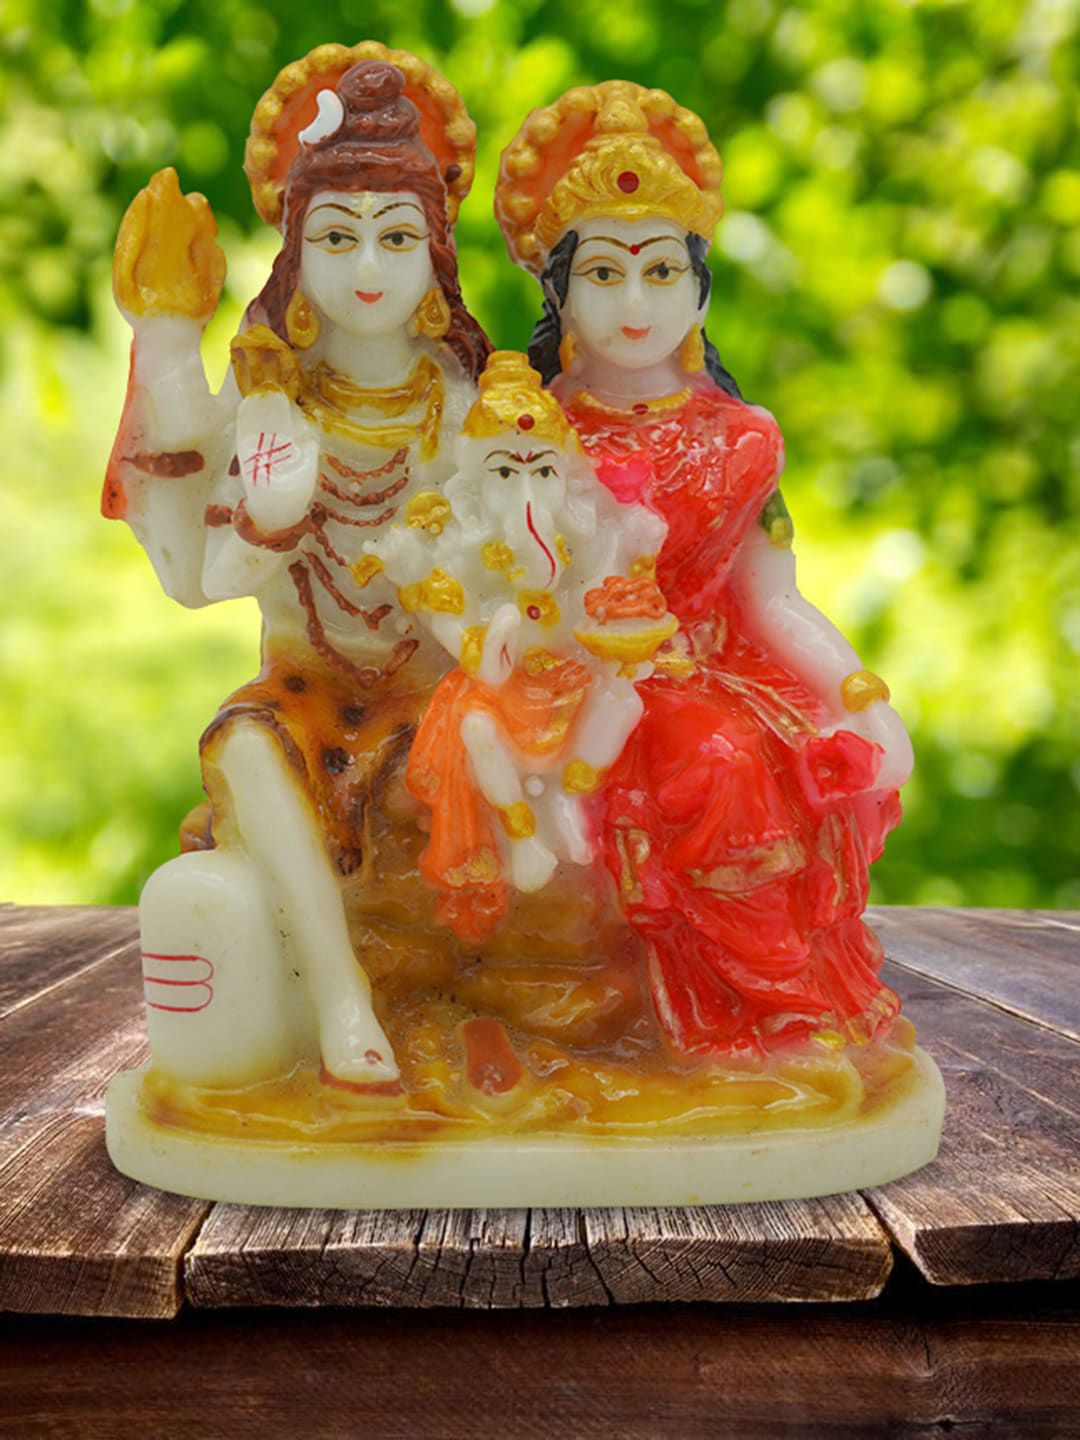 Gallery99 Off-White & Red Lord Shiva Family Idol Showpieces Price in India